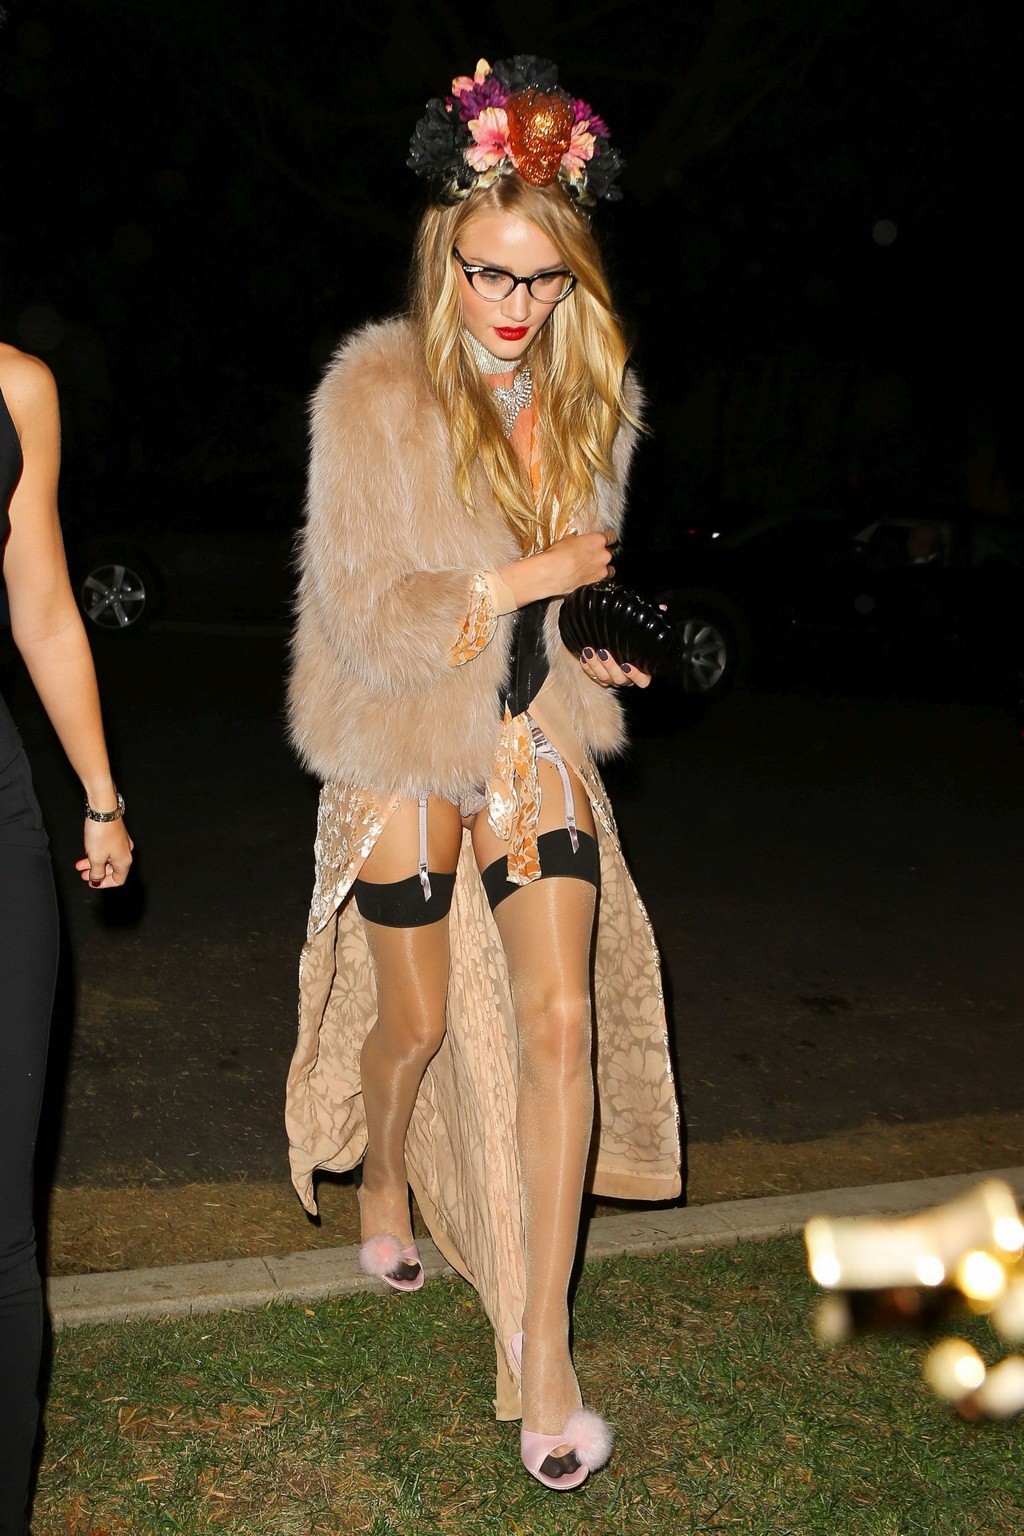 Rosie Huntington Whiteley wearing hot lingerie and stockings at Halloween party  #75249557